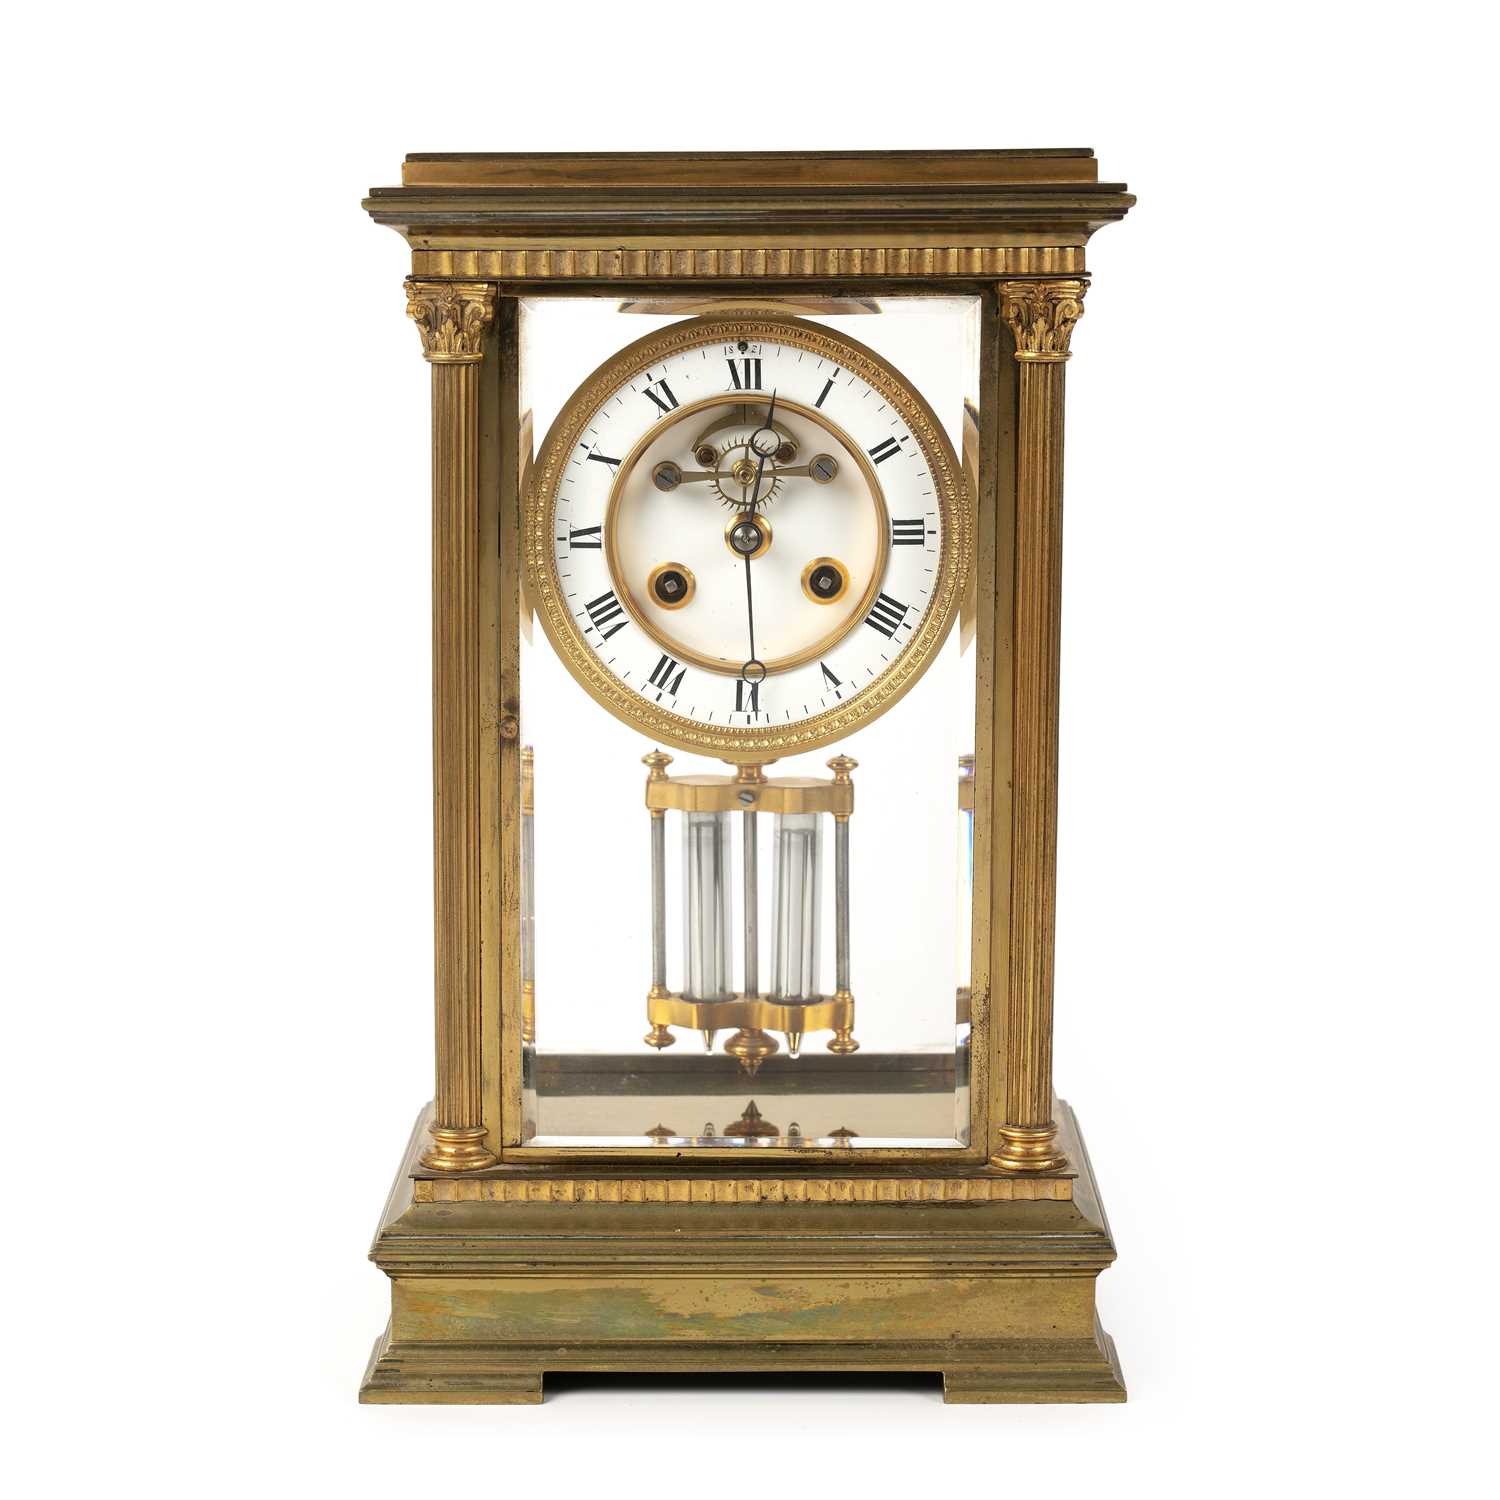 A late 19th century French four glass mantel clock, the two piece Roman dial with visible